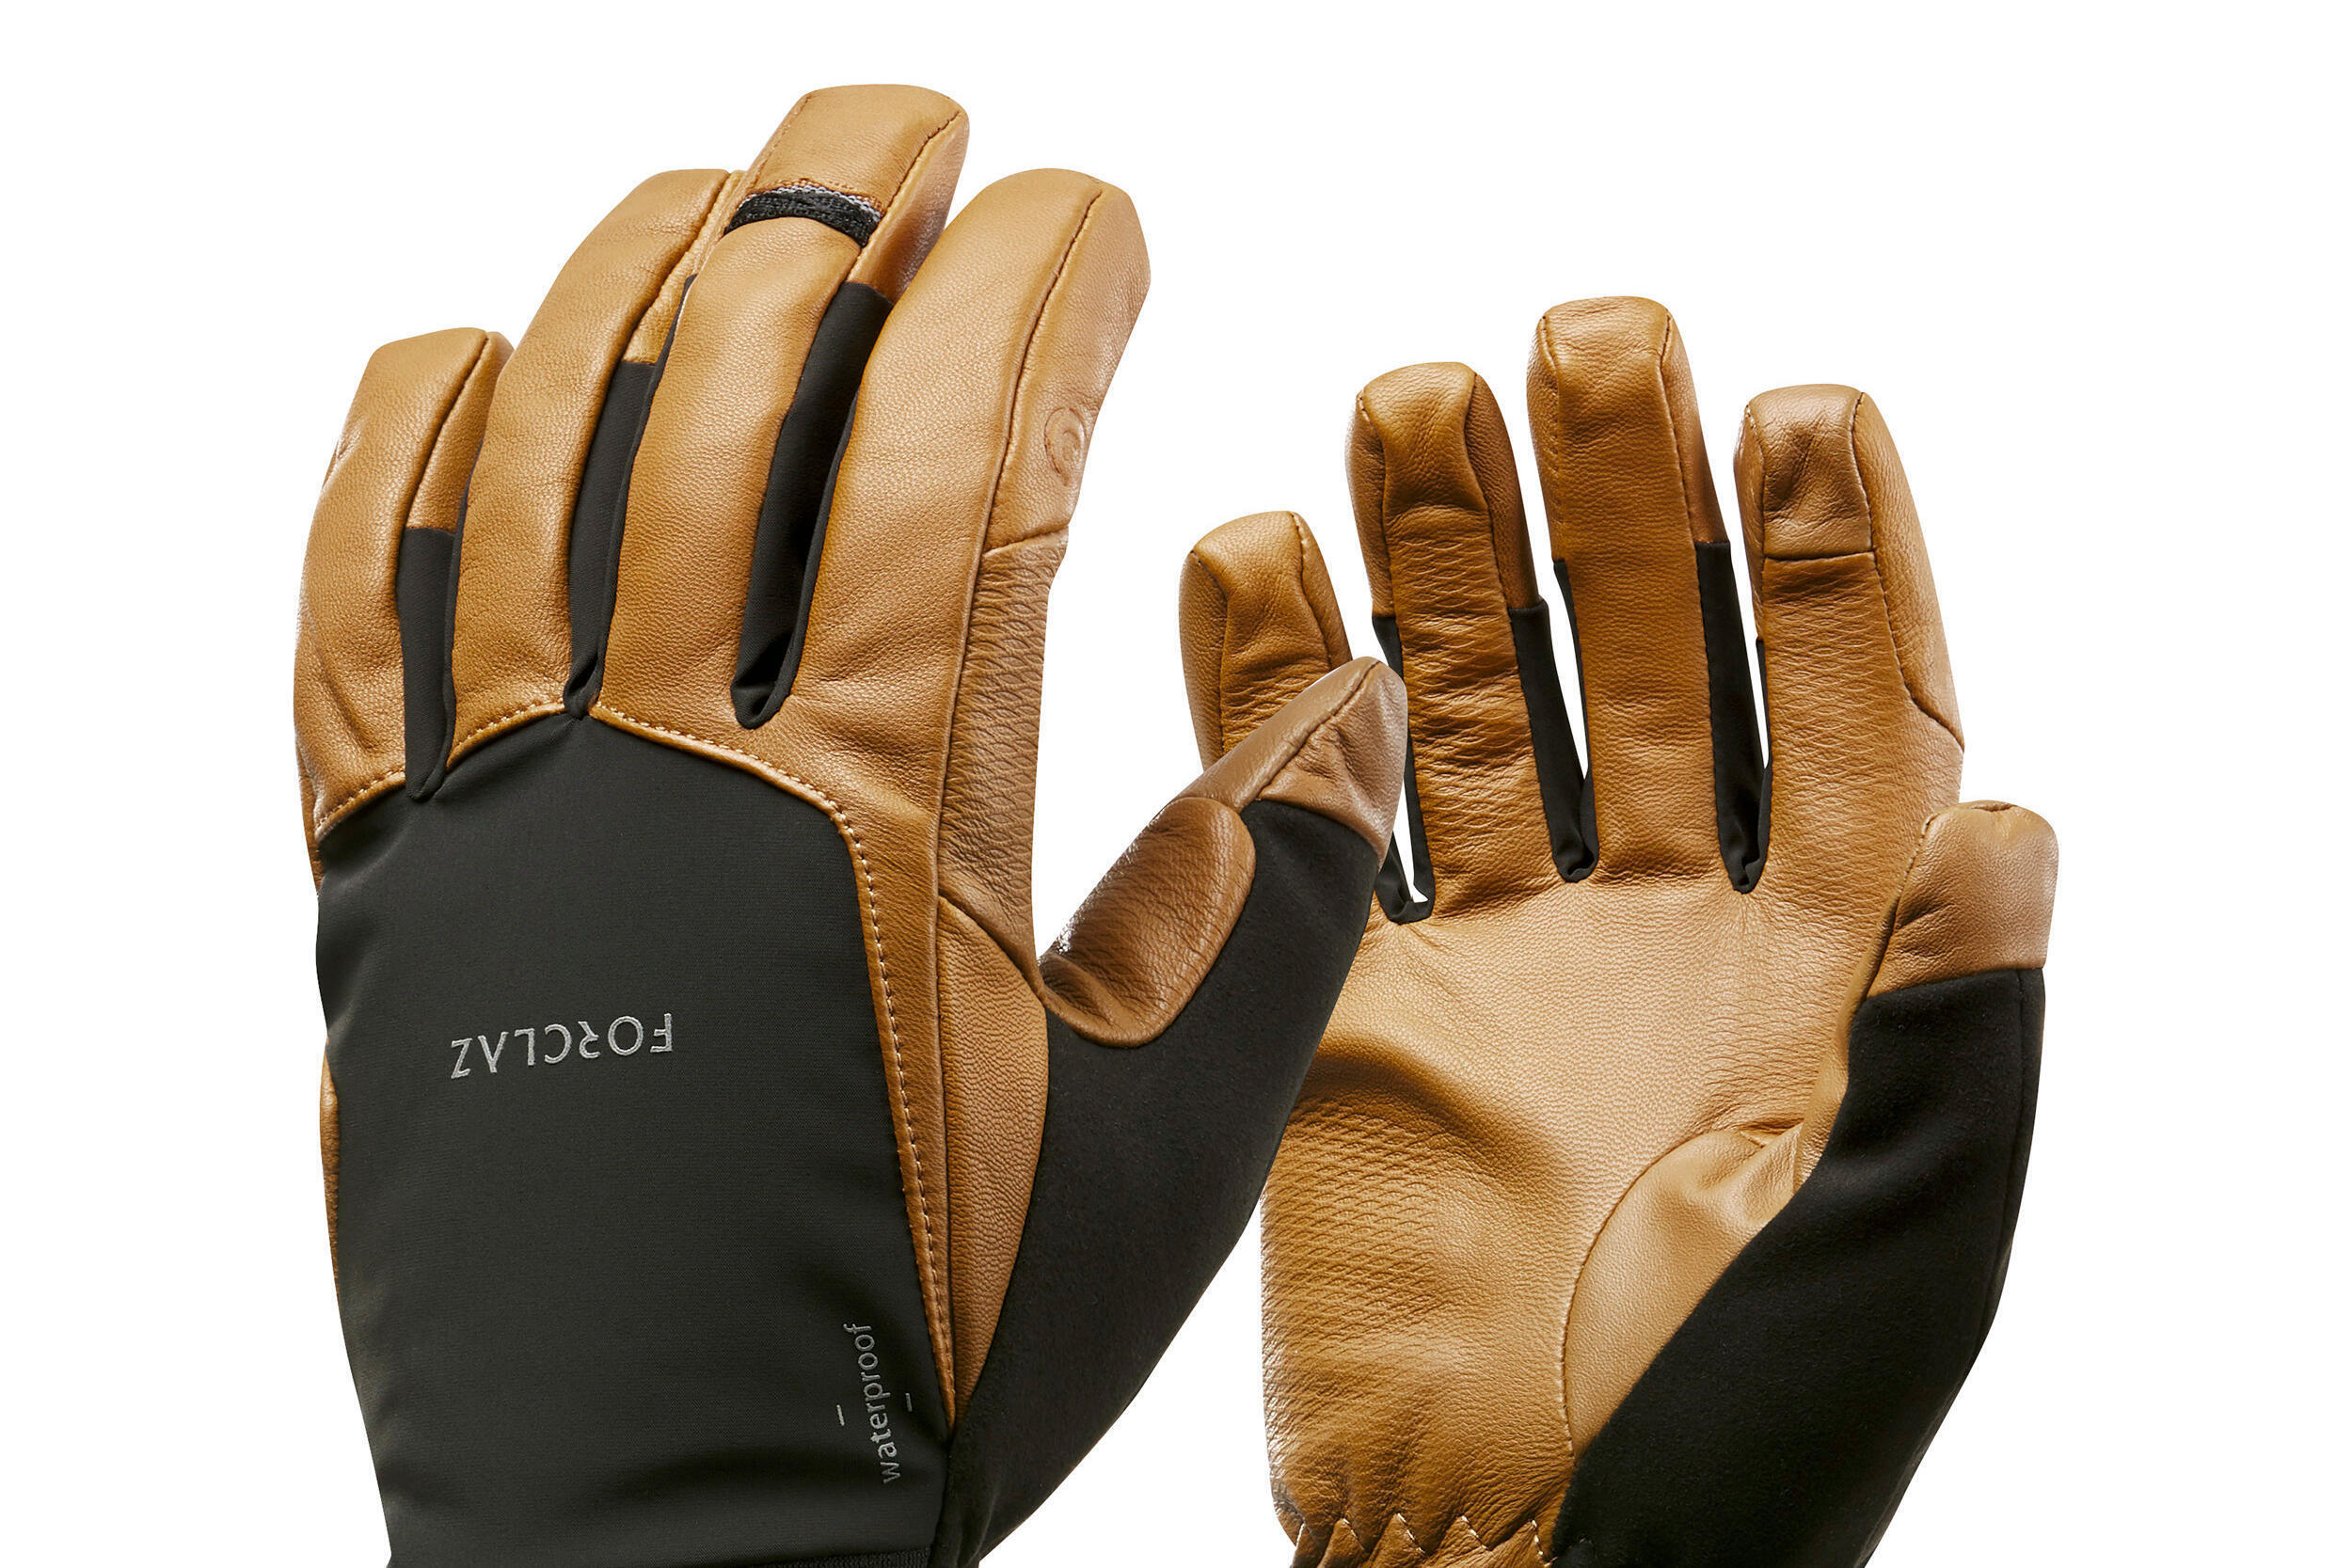 How to choose your winter hiking gloves